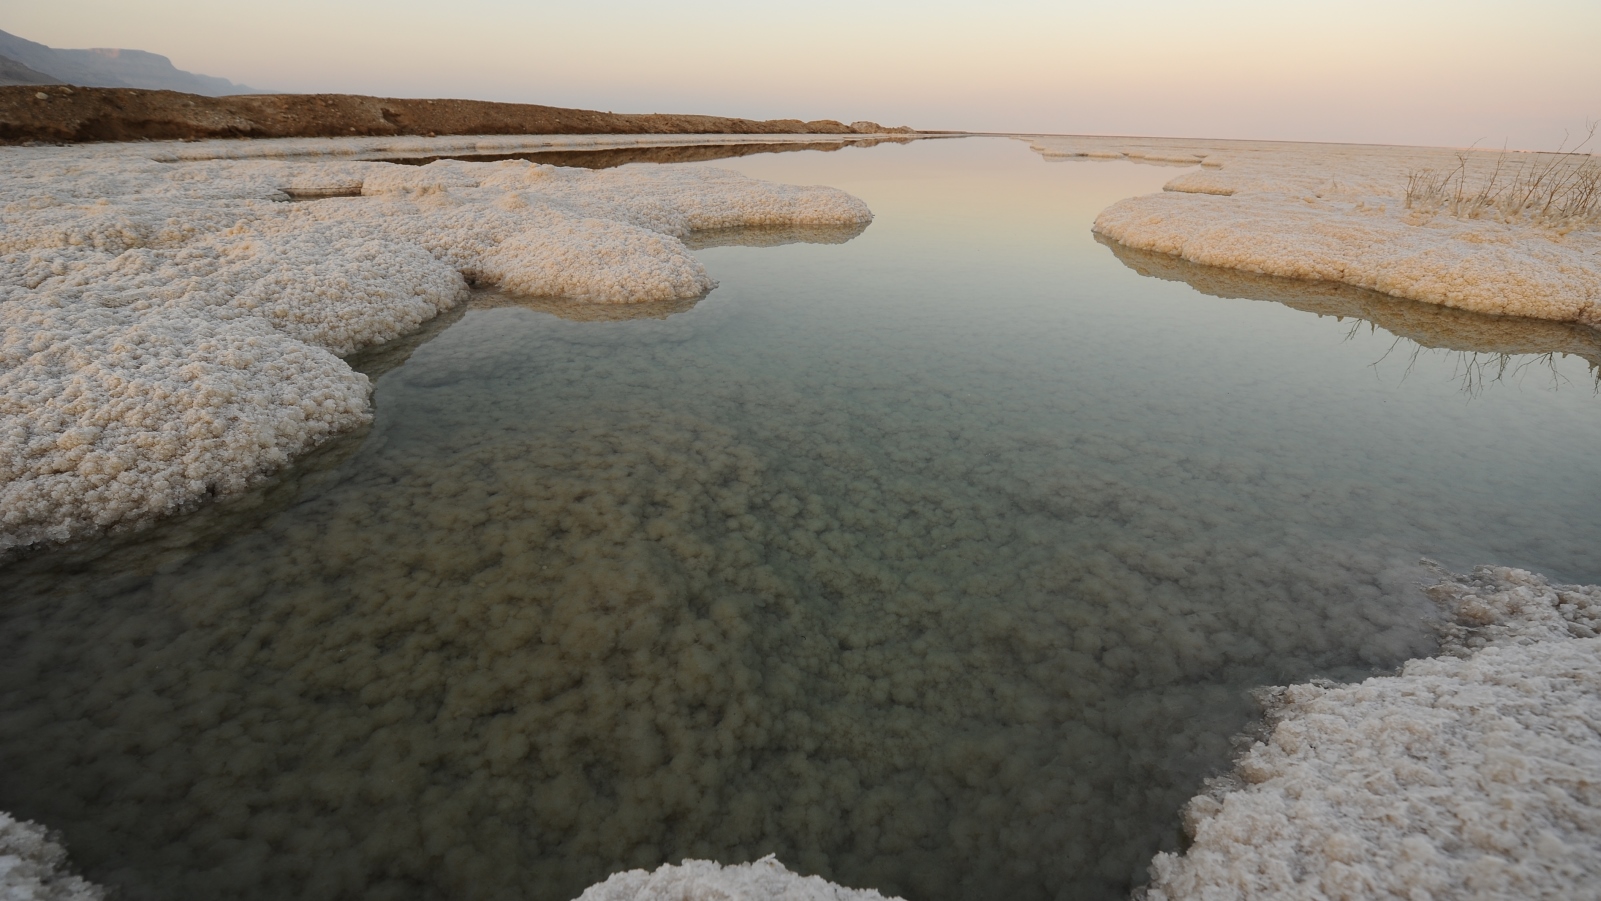 The Dead Sea is dying. These beautiful, ominous photos show the